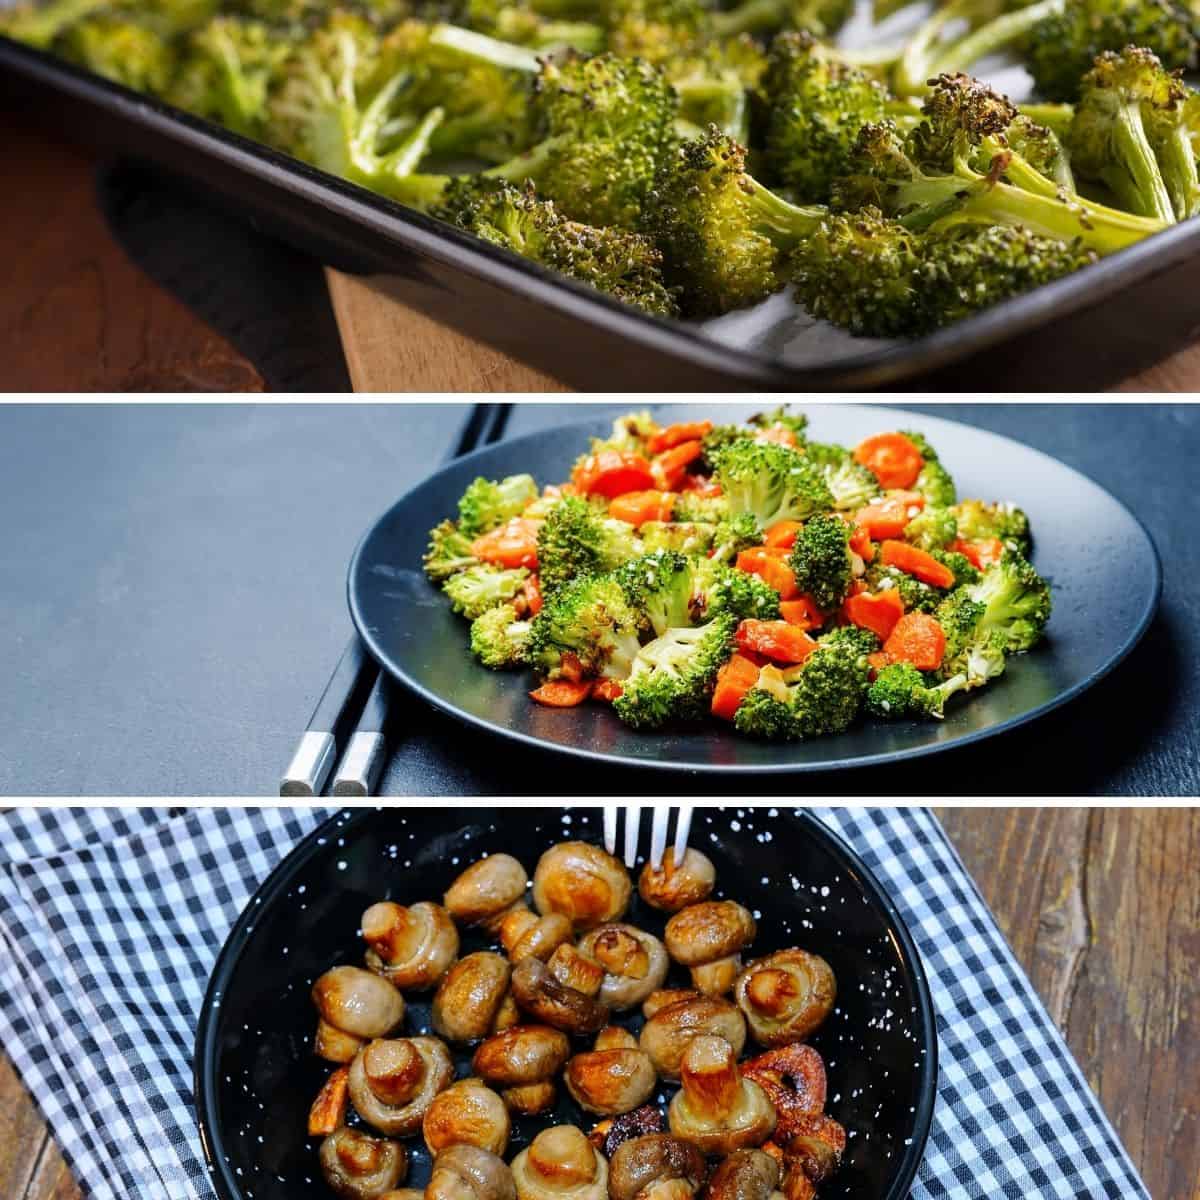 roasted broccoli, roasted broccoli and carrots, garlicy mushroom in a collage to serve for thanksgiving